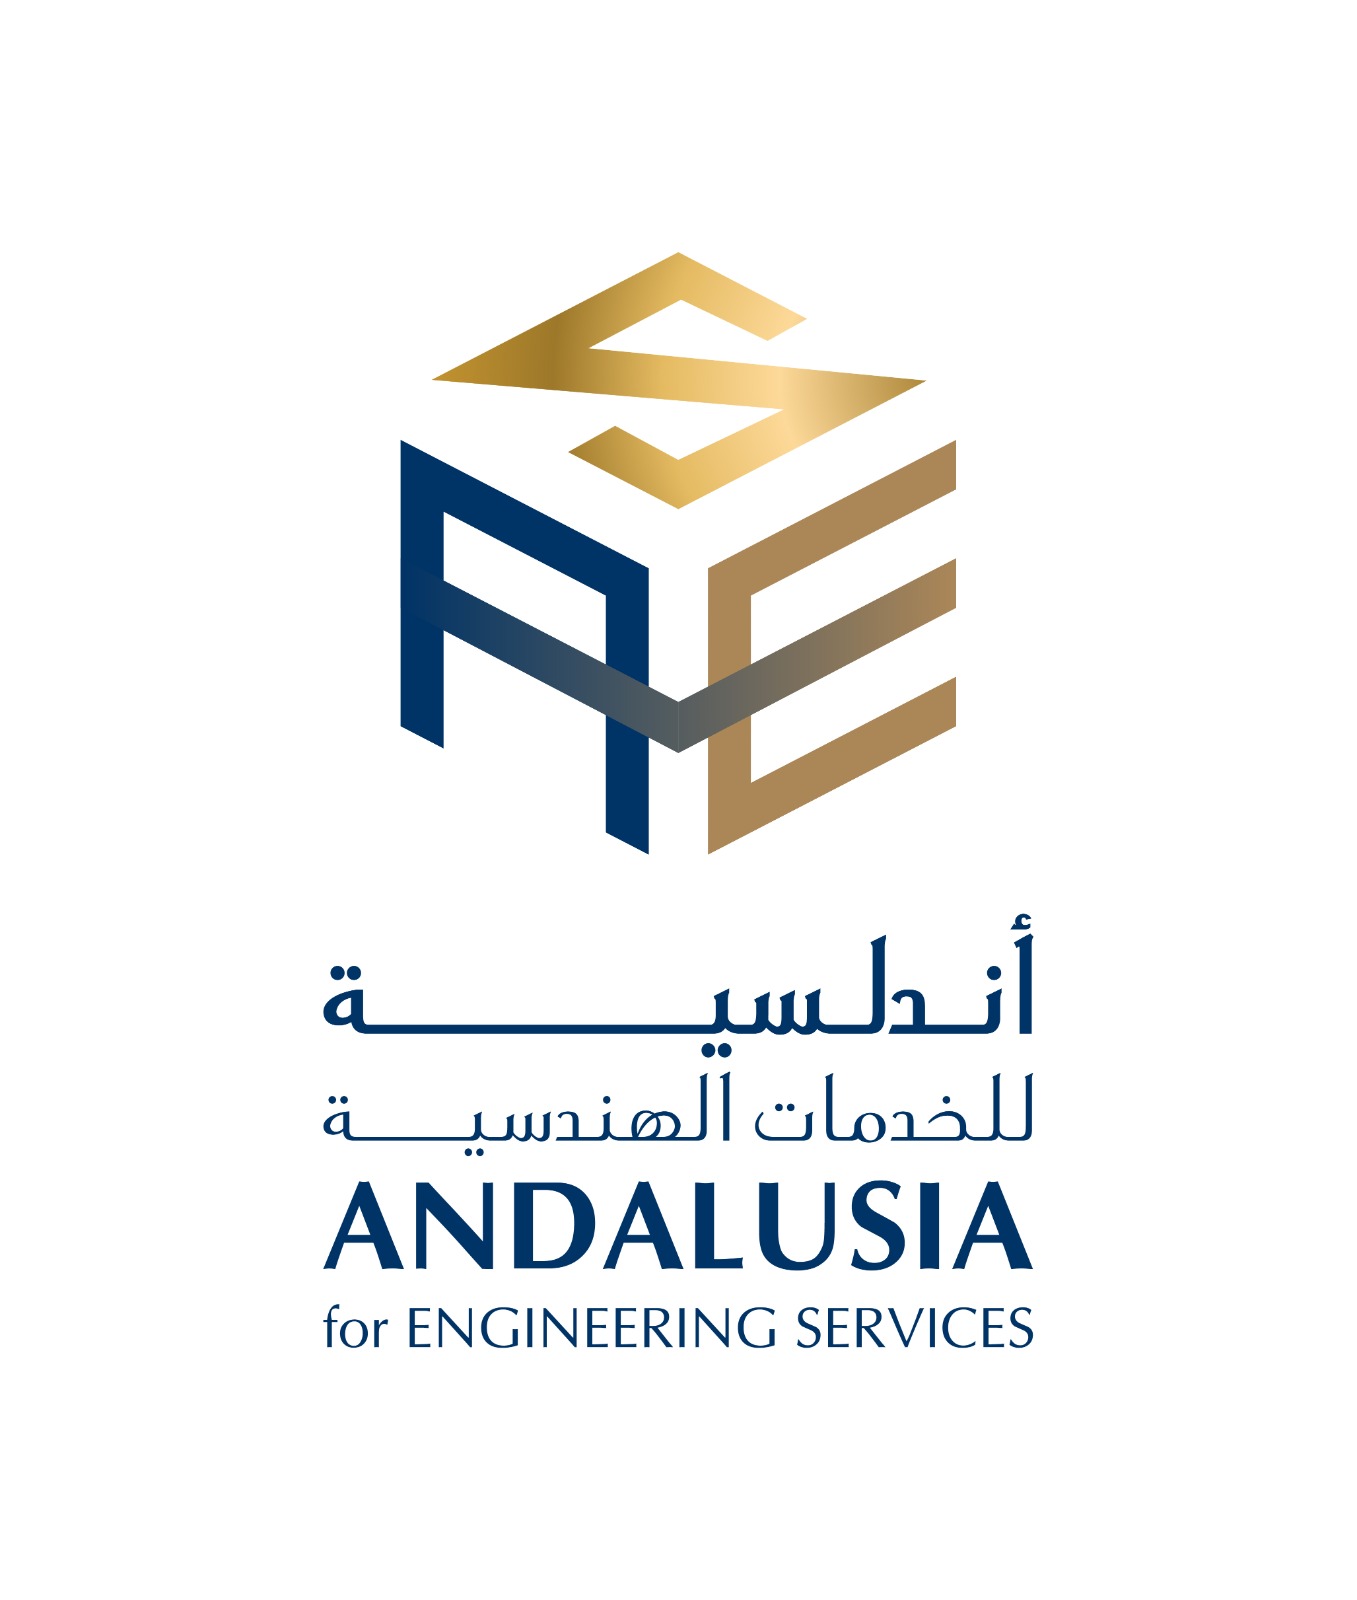 A.E.S Andalusia Engineering Services